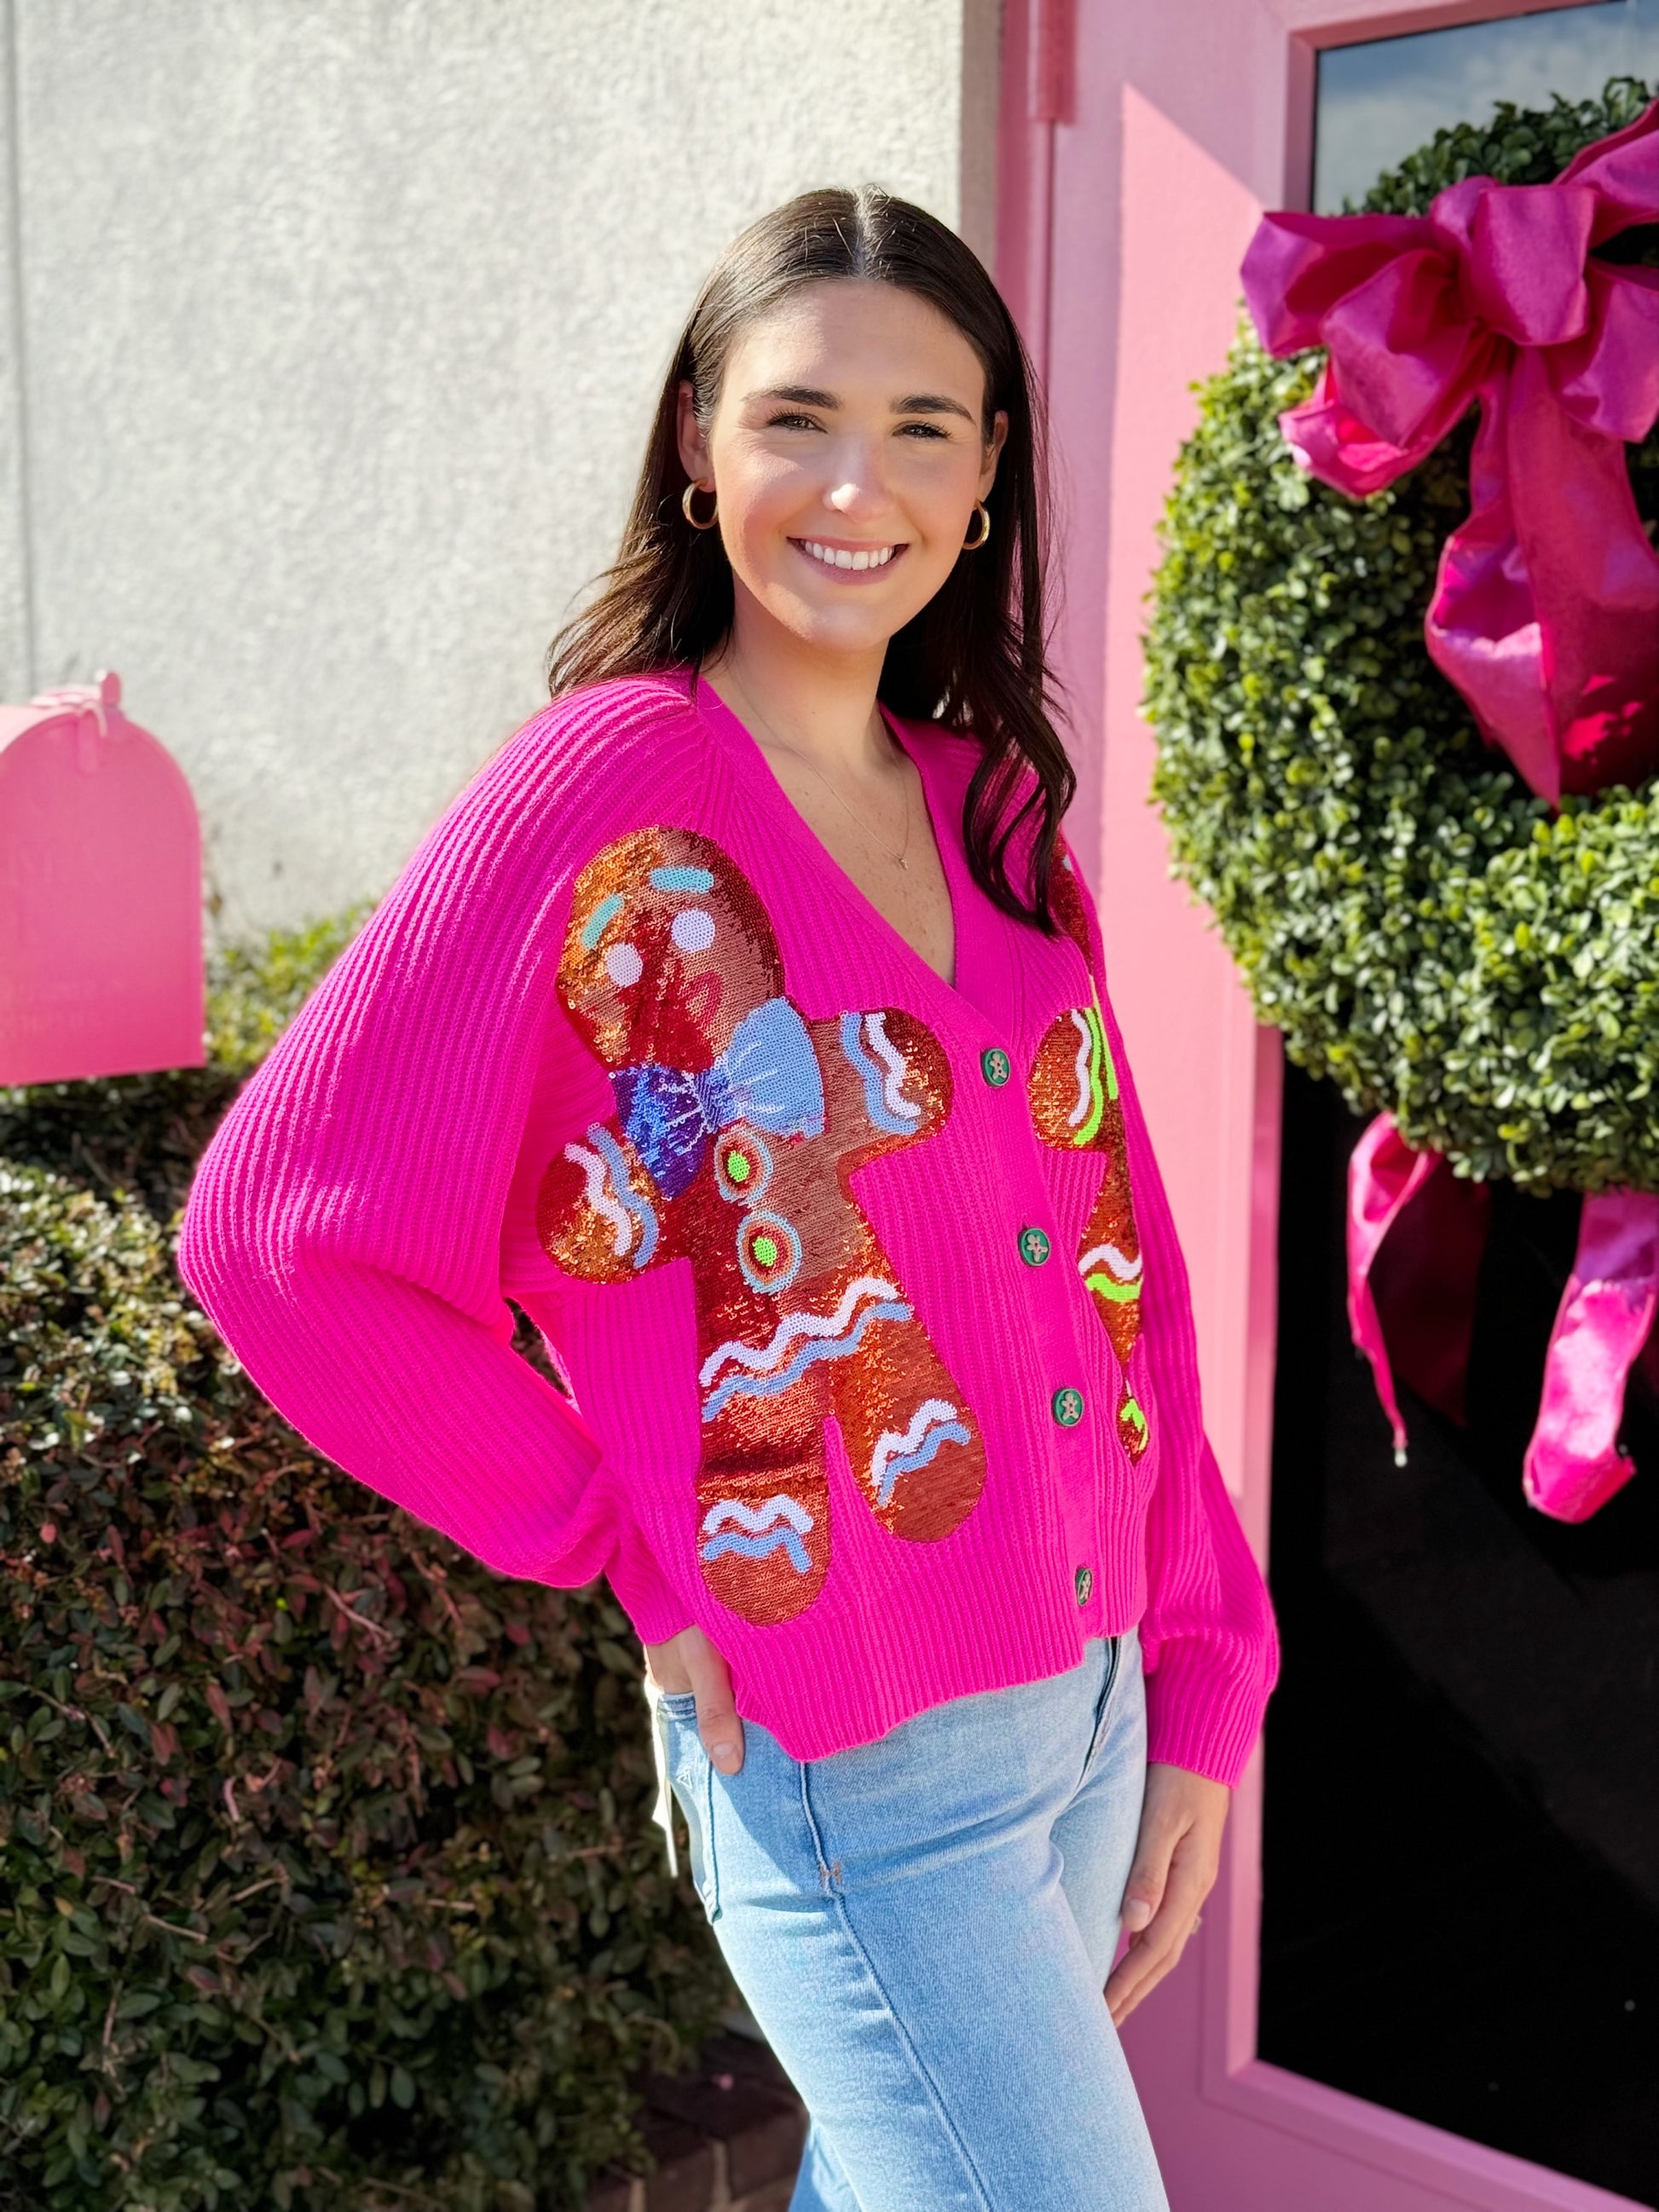 Gingerbread Cardigan by Queen of Sparkles- Hot Pink